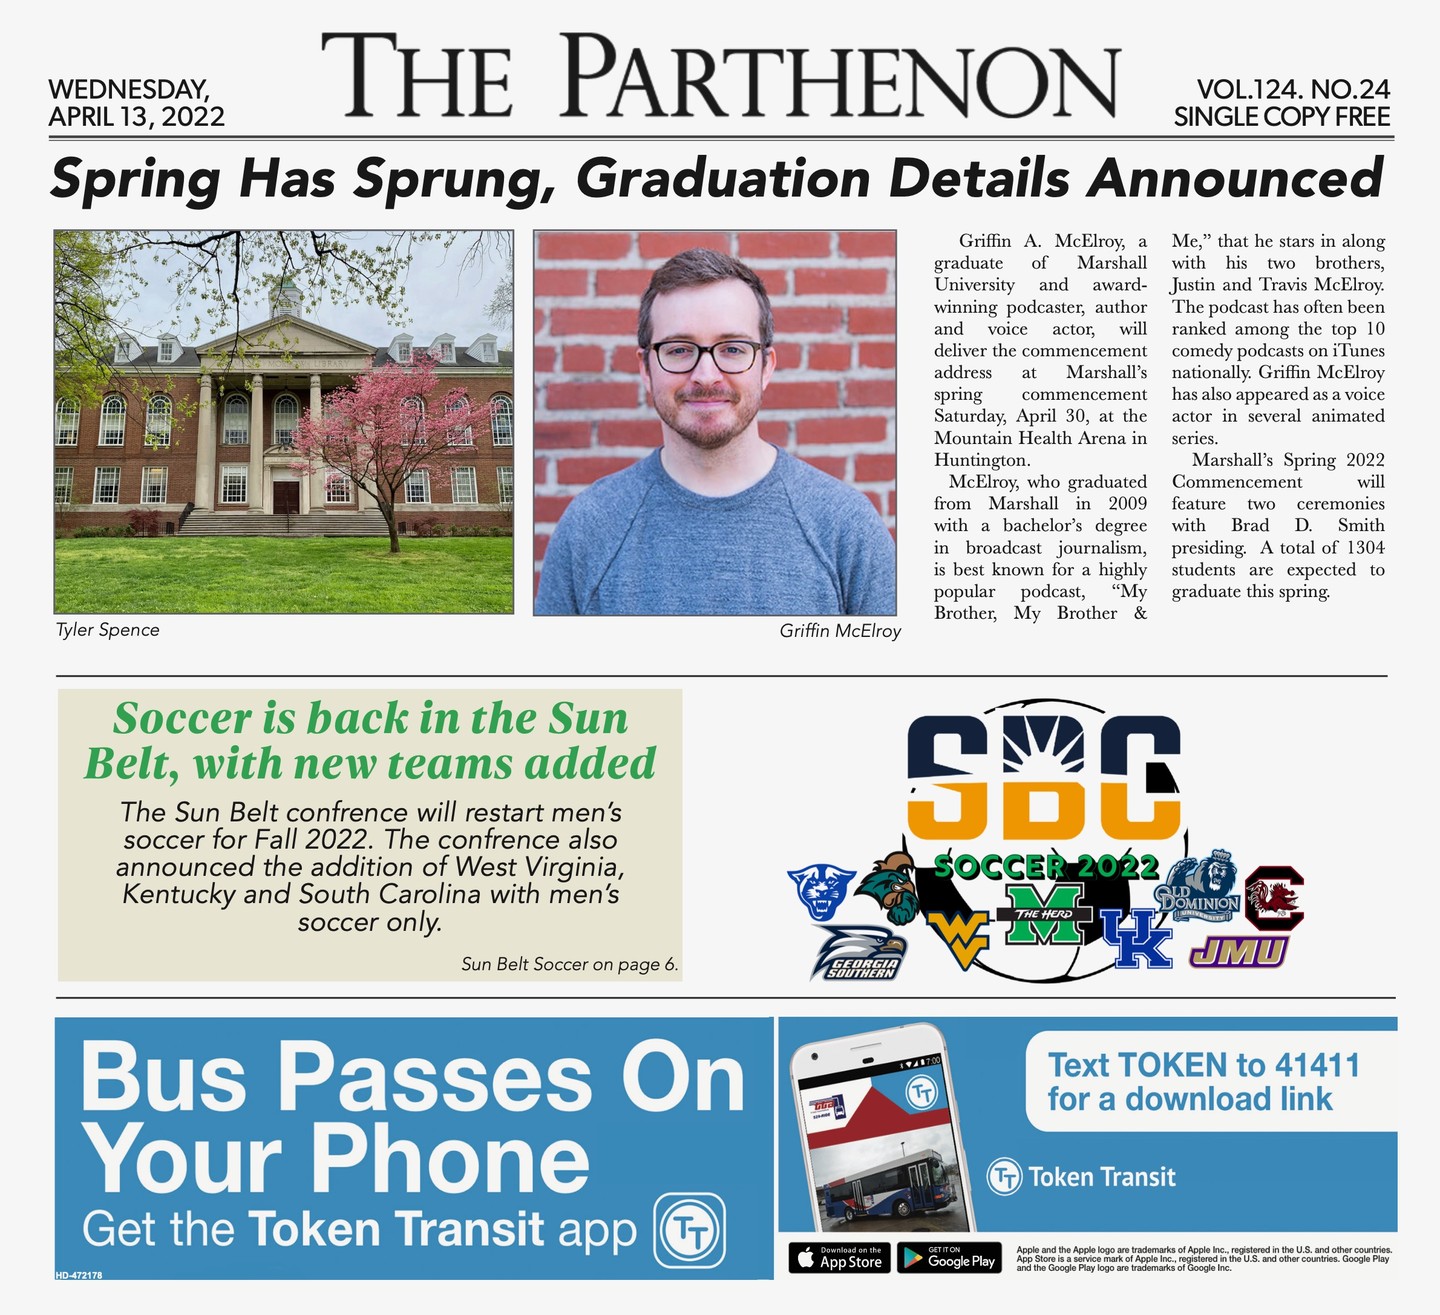 Check out this sneak peek of Wednesday’s front page. Don’t forget to grab a copy tomorrow on campus.